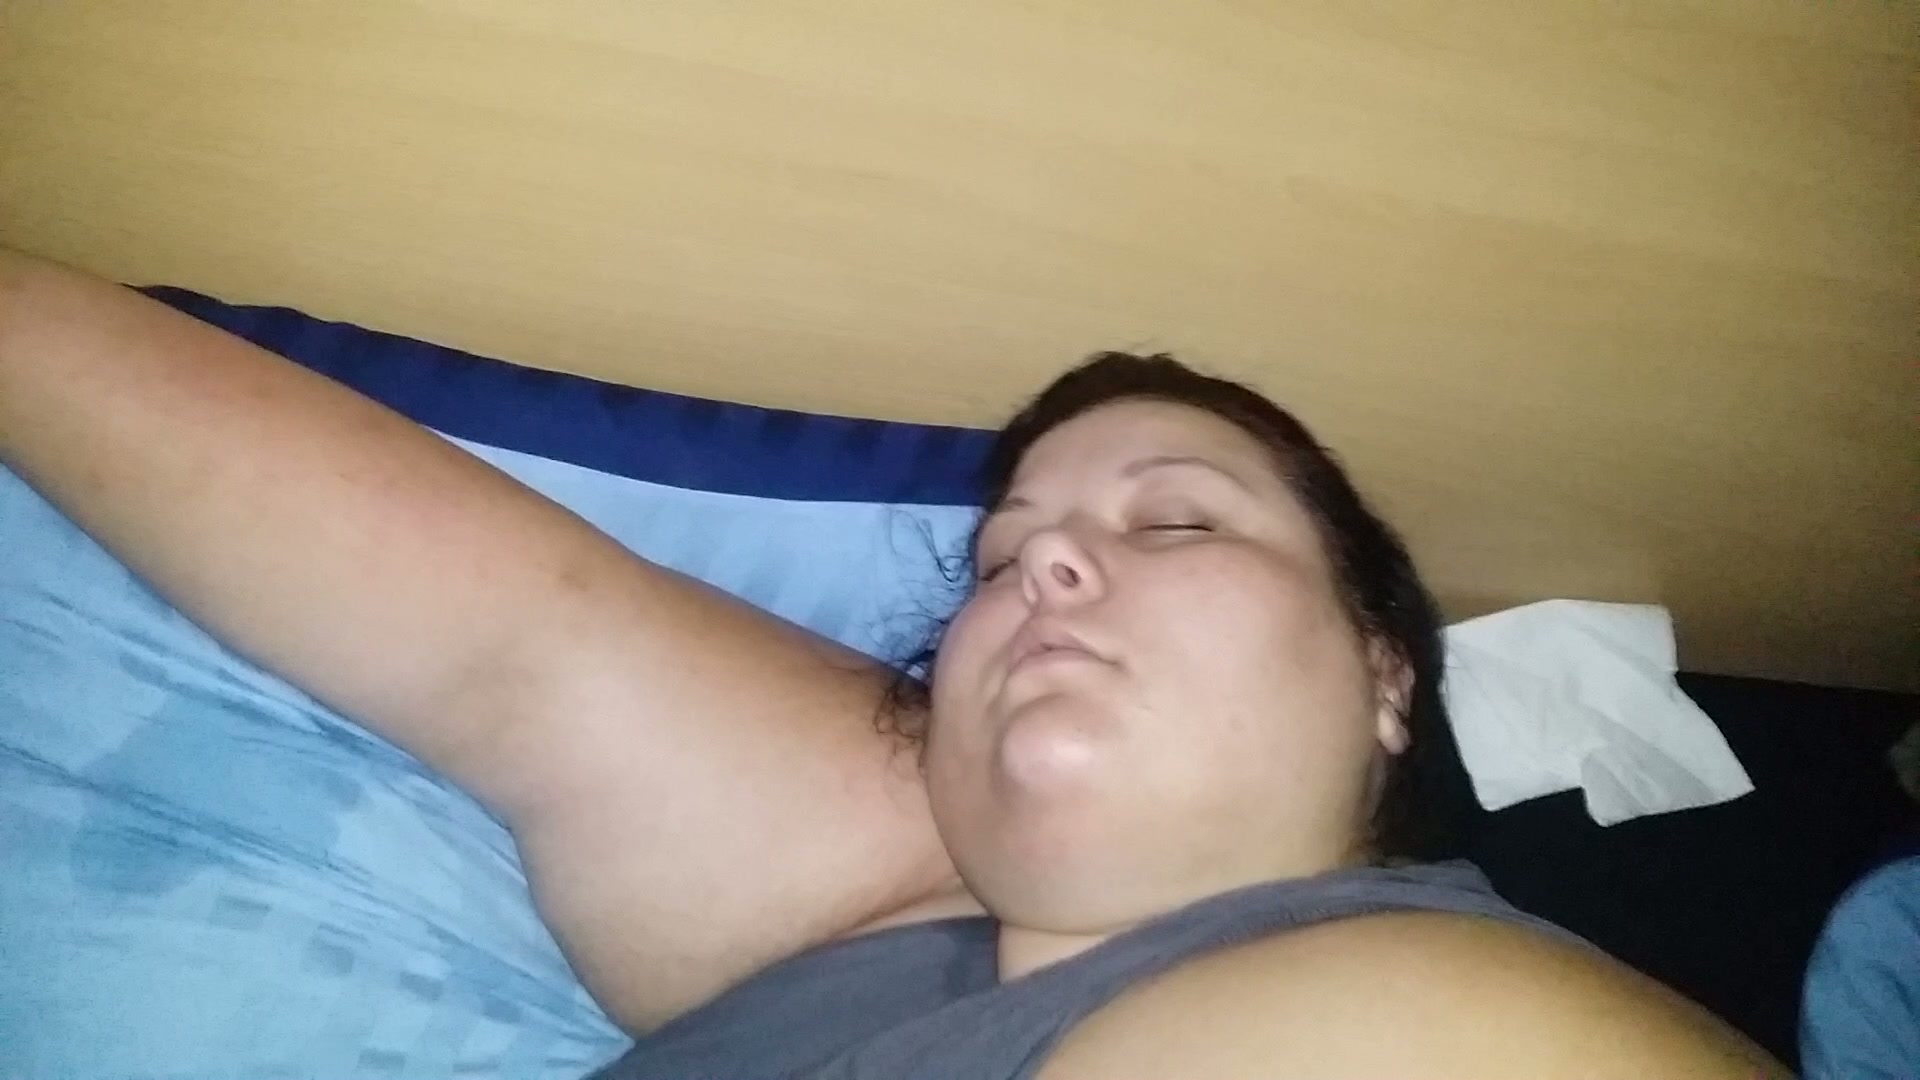 I love to cum all over my chubby wifes ass while shes sleeping picture photo